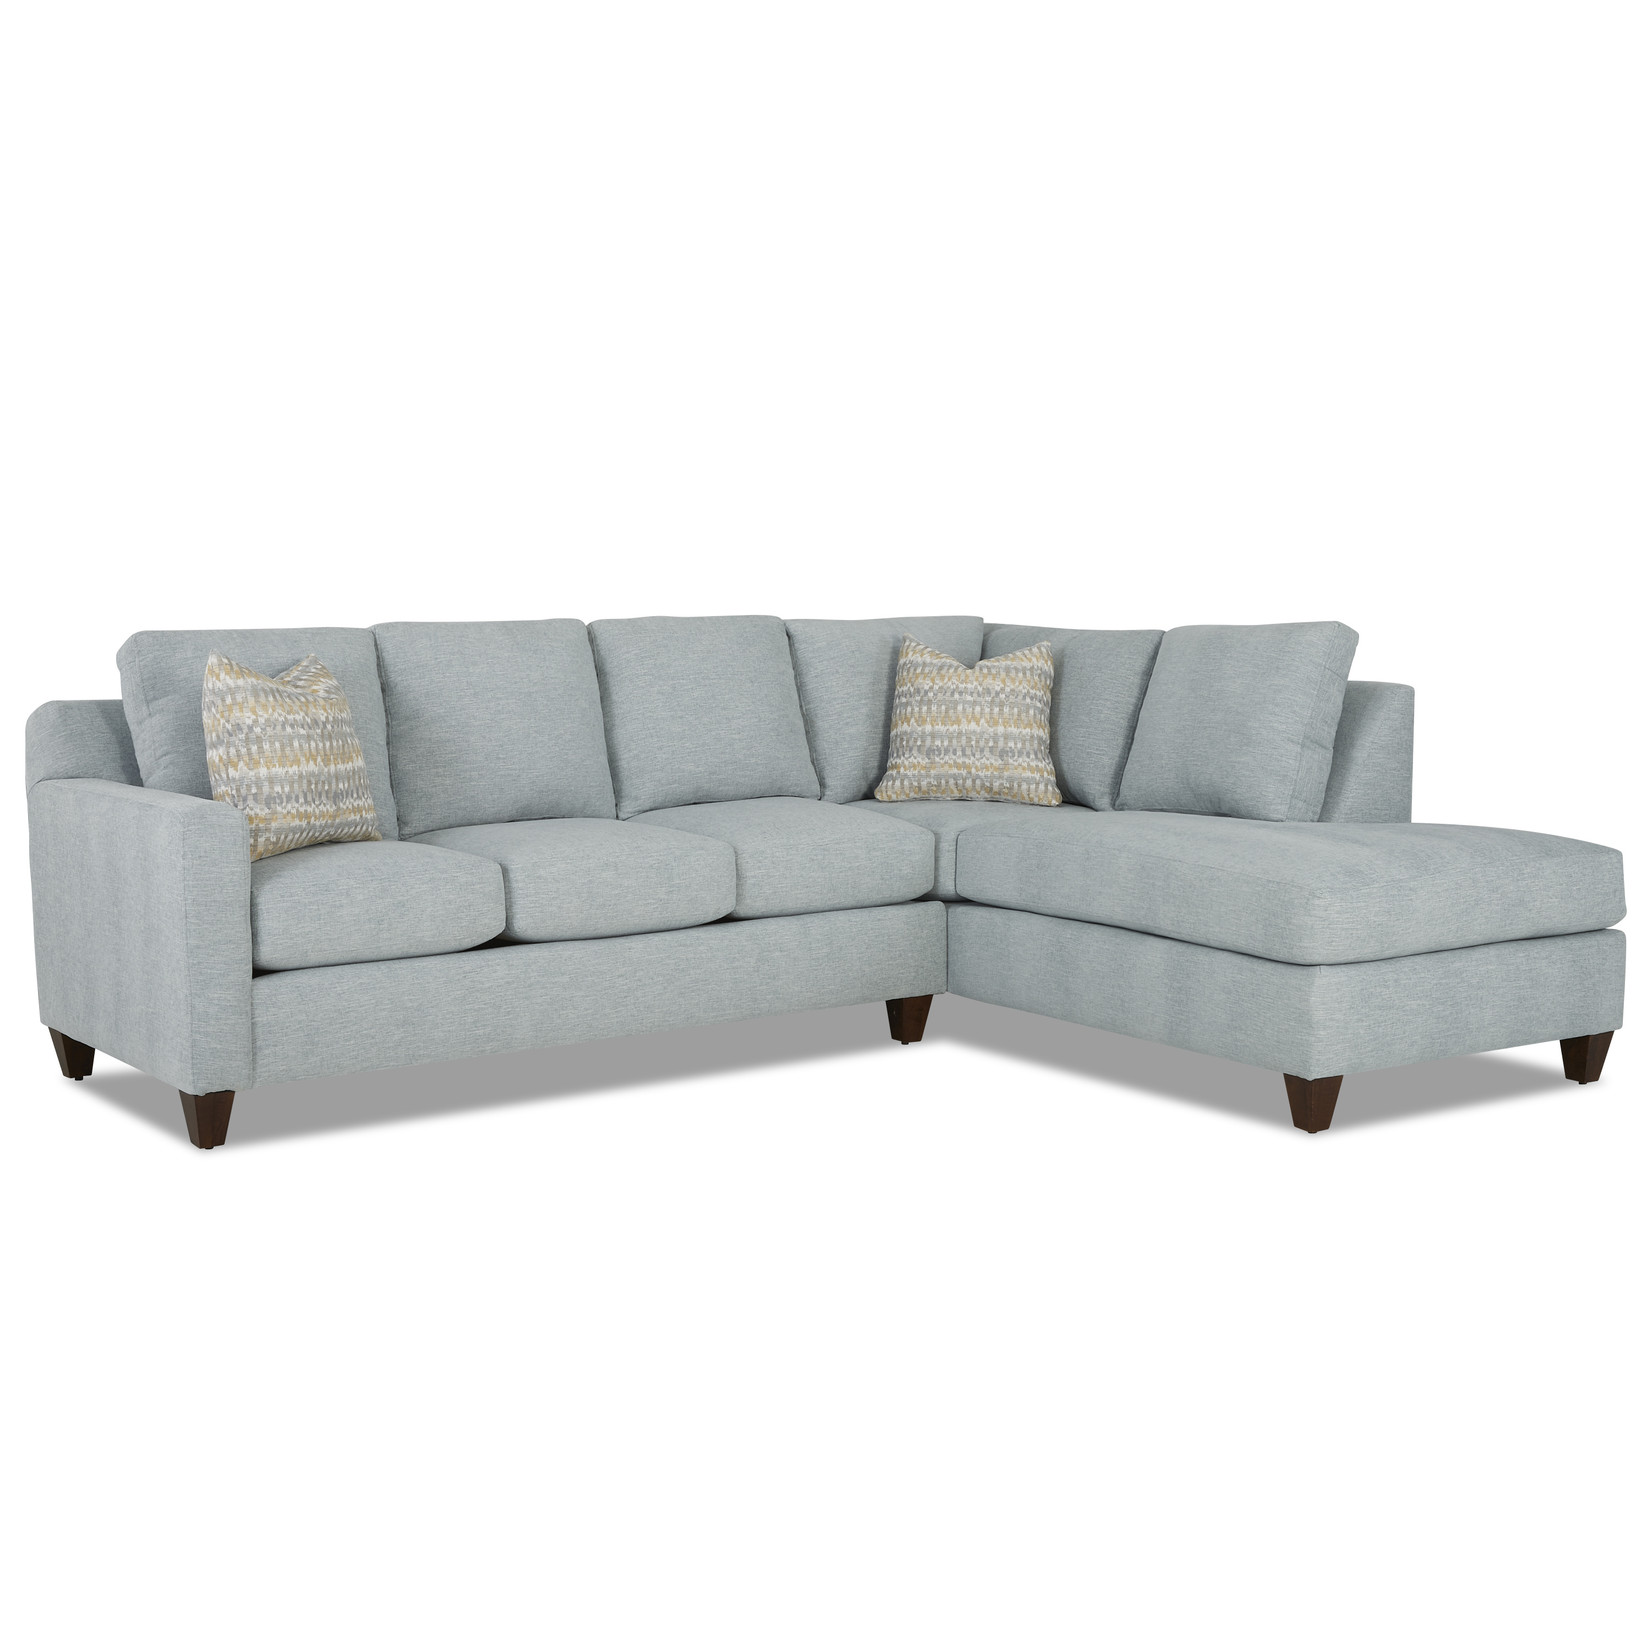 Klaussner Bosco 2pc Sectional Beane Mist/Ozzy Mineral